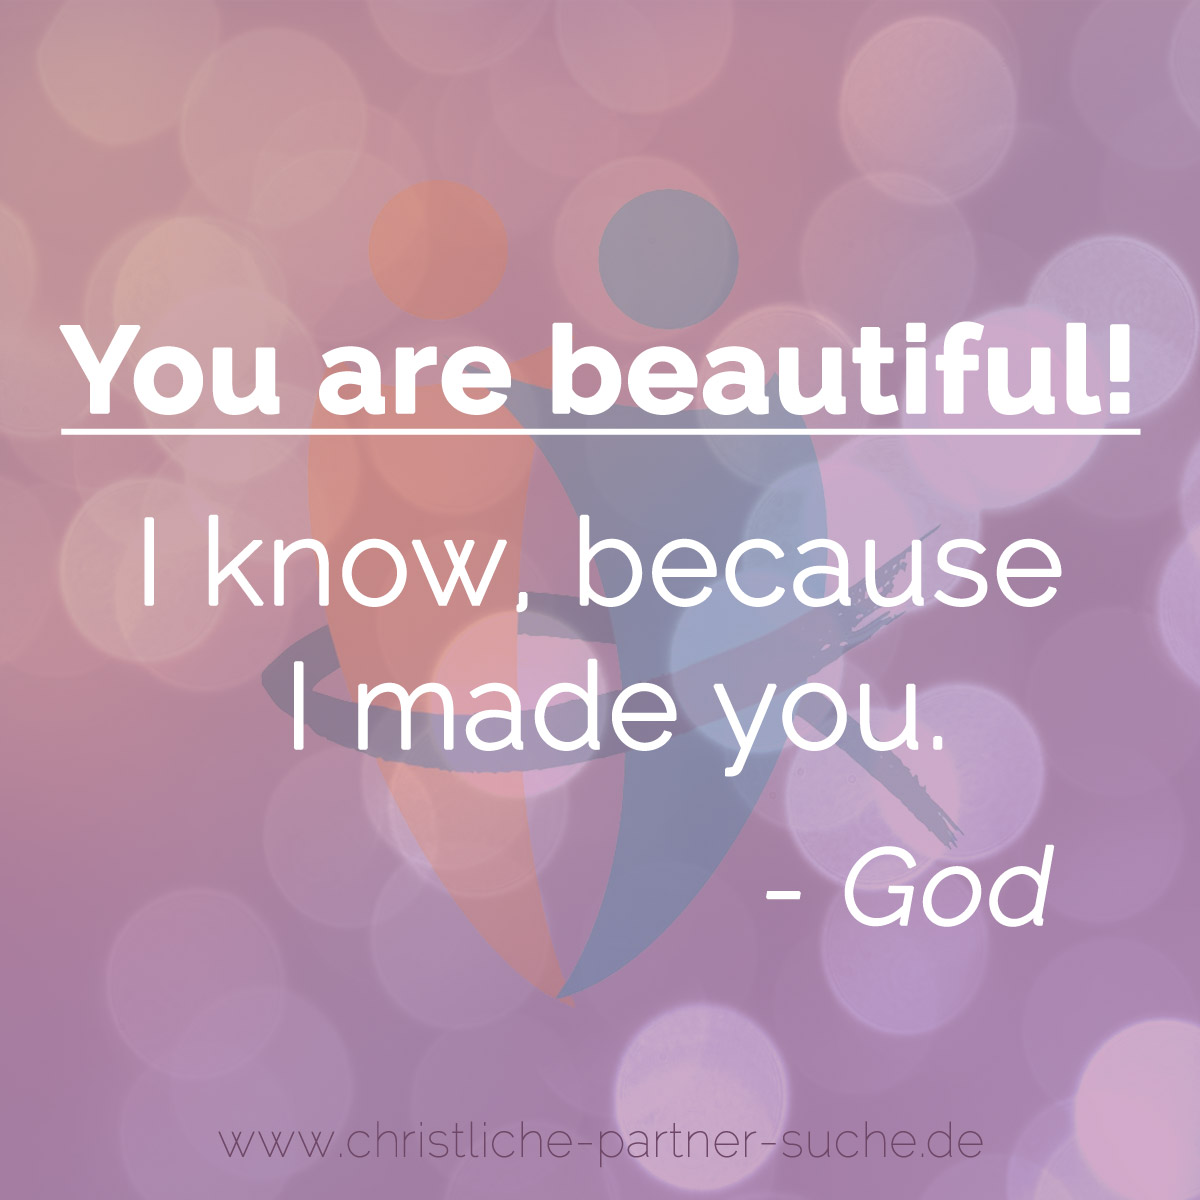 You are beautiful!